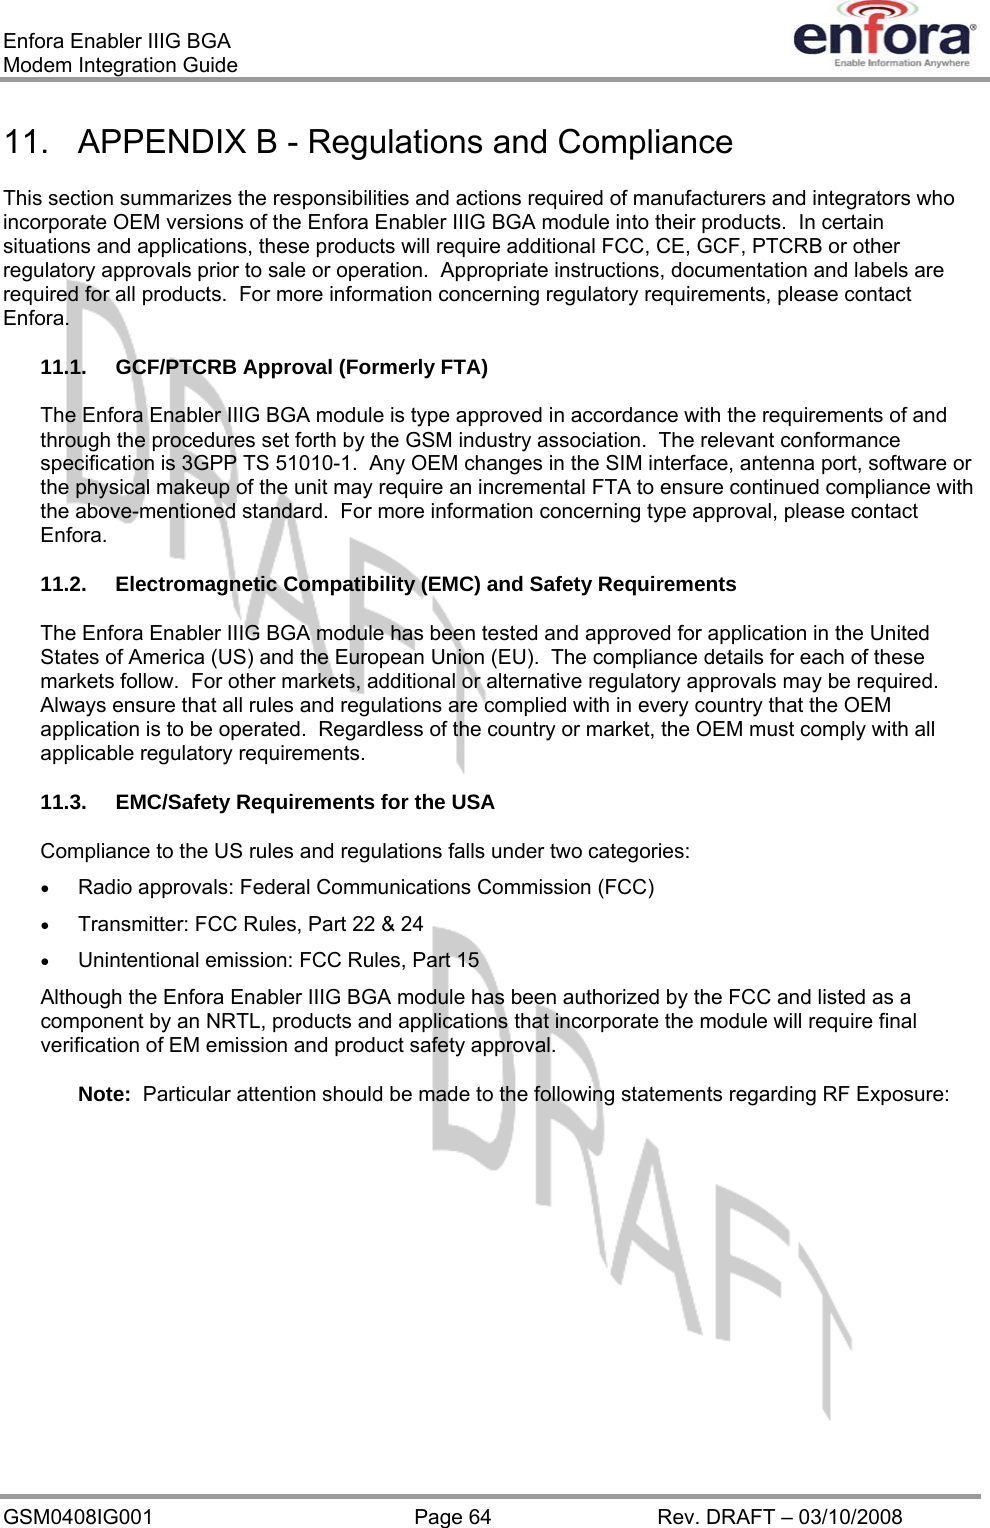 Enfora Enabler IIIG BGA Modem Integration Guide 11.  APPENDIX B - Regulations and Compliance This section summarizes the responsibilities and actions required of manufacturers and integrators who incorporate OEM versions of the Enfora Enabler IIIG BGA module into their products.  In certain situations and applications, these products will require additional FCC, CE, GCF, PTCRB or other regulatory approvals prior to sale or operation.  Appropriate instructions, documentation and labels are required for all products.  For more information concerning regulatory requirements, please contact Enfora. 11.1.  GCF/PTCRB Approval (Formerly FTA) The Enfora Enabler IIIG BGA module is type approved in accordance with the requirements of and through the procedures set forth by the GSM industry association.  The relevant conformance specification is 3GPP TS 51010-1.  Any OEM changes in the SIM interface, antenna port, software or the physical makeup of the unit may require an incremental FTA to ensure continued compliance with the above-mentioned standard.  For more information concerning type approval, please contact Enfora. 11.2. Electromagnetic Compatibility (EMC) and Safety Requirements The Enfora Enabler IIIG BGA module has been tested and approved for application in the United States of America (US) and the European Union (EU).  The compliance details for each of these markets follow.  For other markets, additional or alternative regulatory approvals may be required.  Always ensure that all rules and regulations are complied with in every country that the OEM application is to be operated.  Regardless of the country or market, the OEM must comply with all applicable regulatory requirements. 11.3.  EMC/Safety Requirements for the USA Compliance to the US rules and regulations falls under two categories: •  Radio approvals: Federal Communications Commission (FCC) •  Transmitter: FCC Rules, Part 22 &amp; 24 •  Unintentional emission: FCC Rules, Part 15 Although the Enfora Enabler IIIG BGA module has been authorized by the FCC and listed as a component by an NRTL, products and applications that incorporate the module will require final verification of EM emission and product safety approval. Note:  Particular attention should be made to the following statements regarding RF Exposure: GSM0408IG001  Page 64  Rev. DRAFT – 03/10/2008 